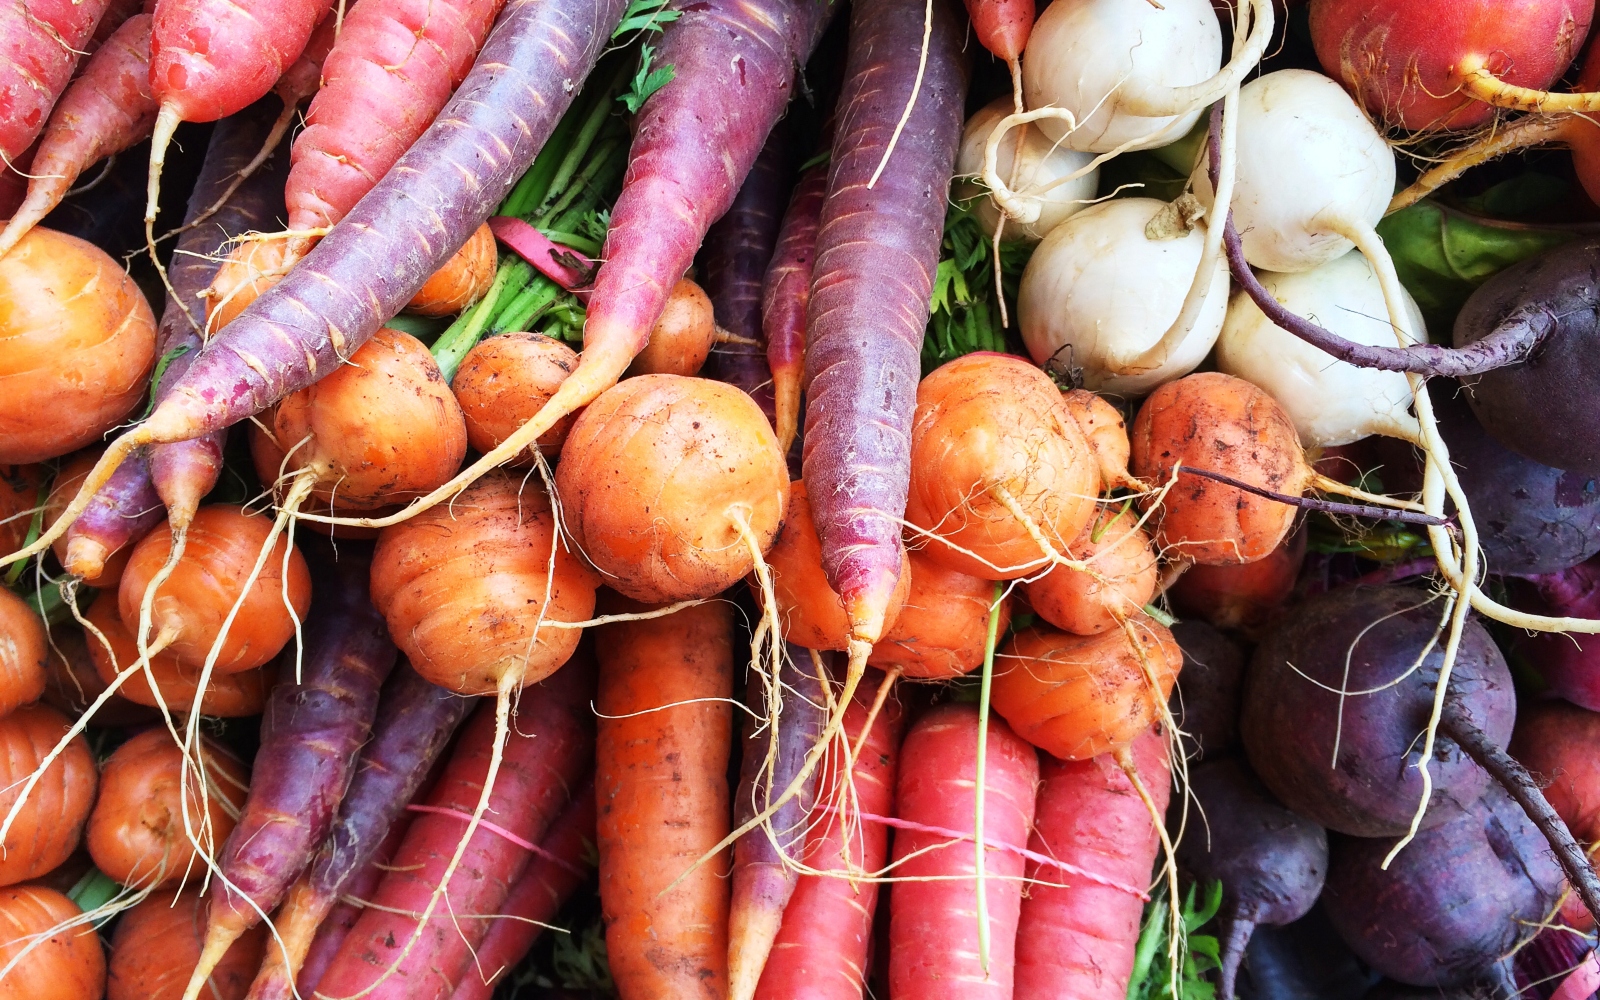 Colorful carrots, beets, and other root vegetables